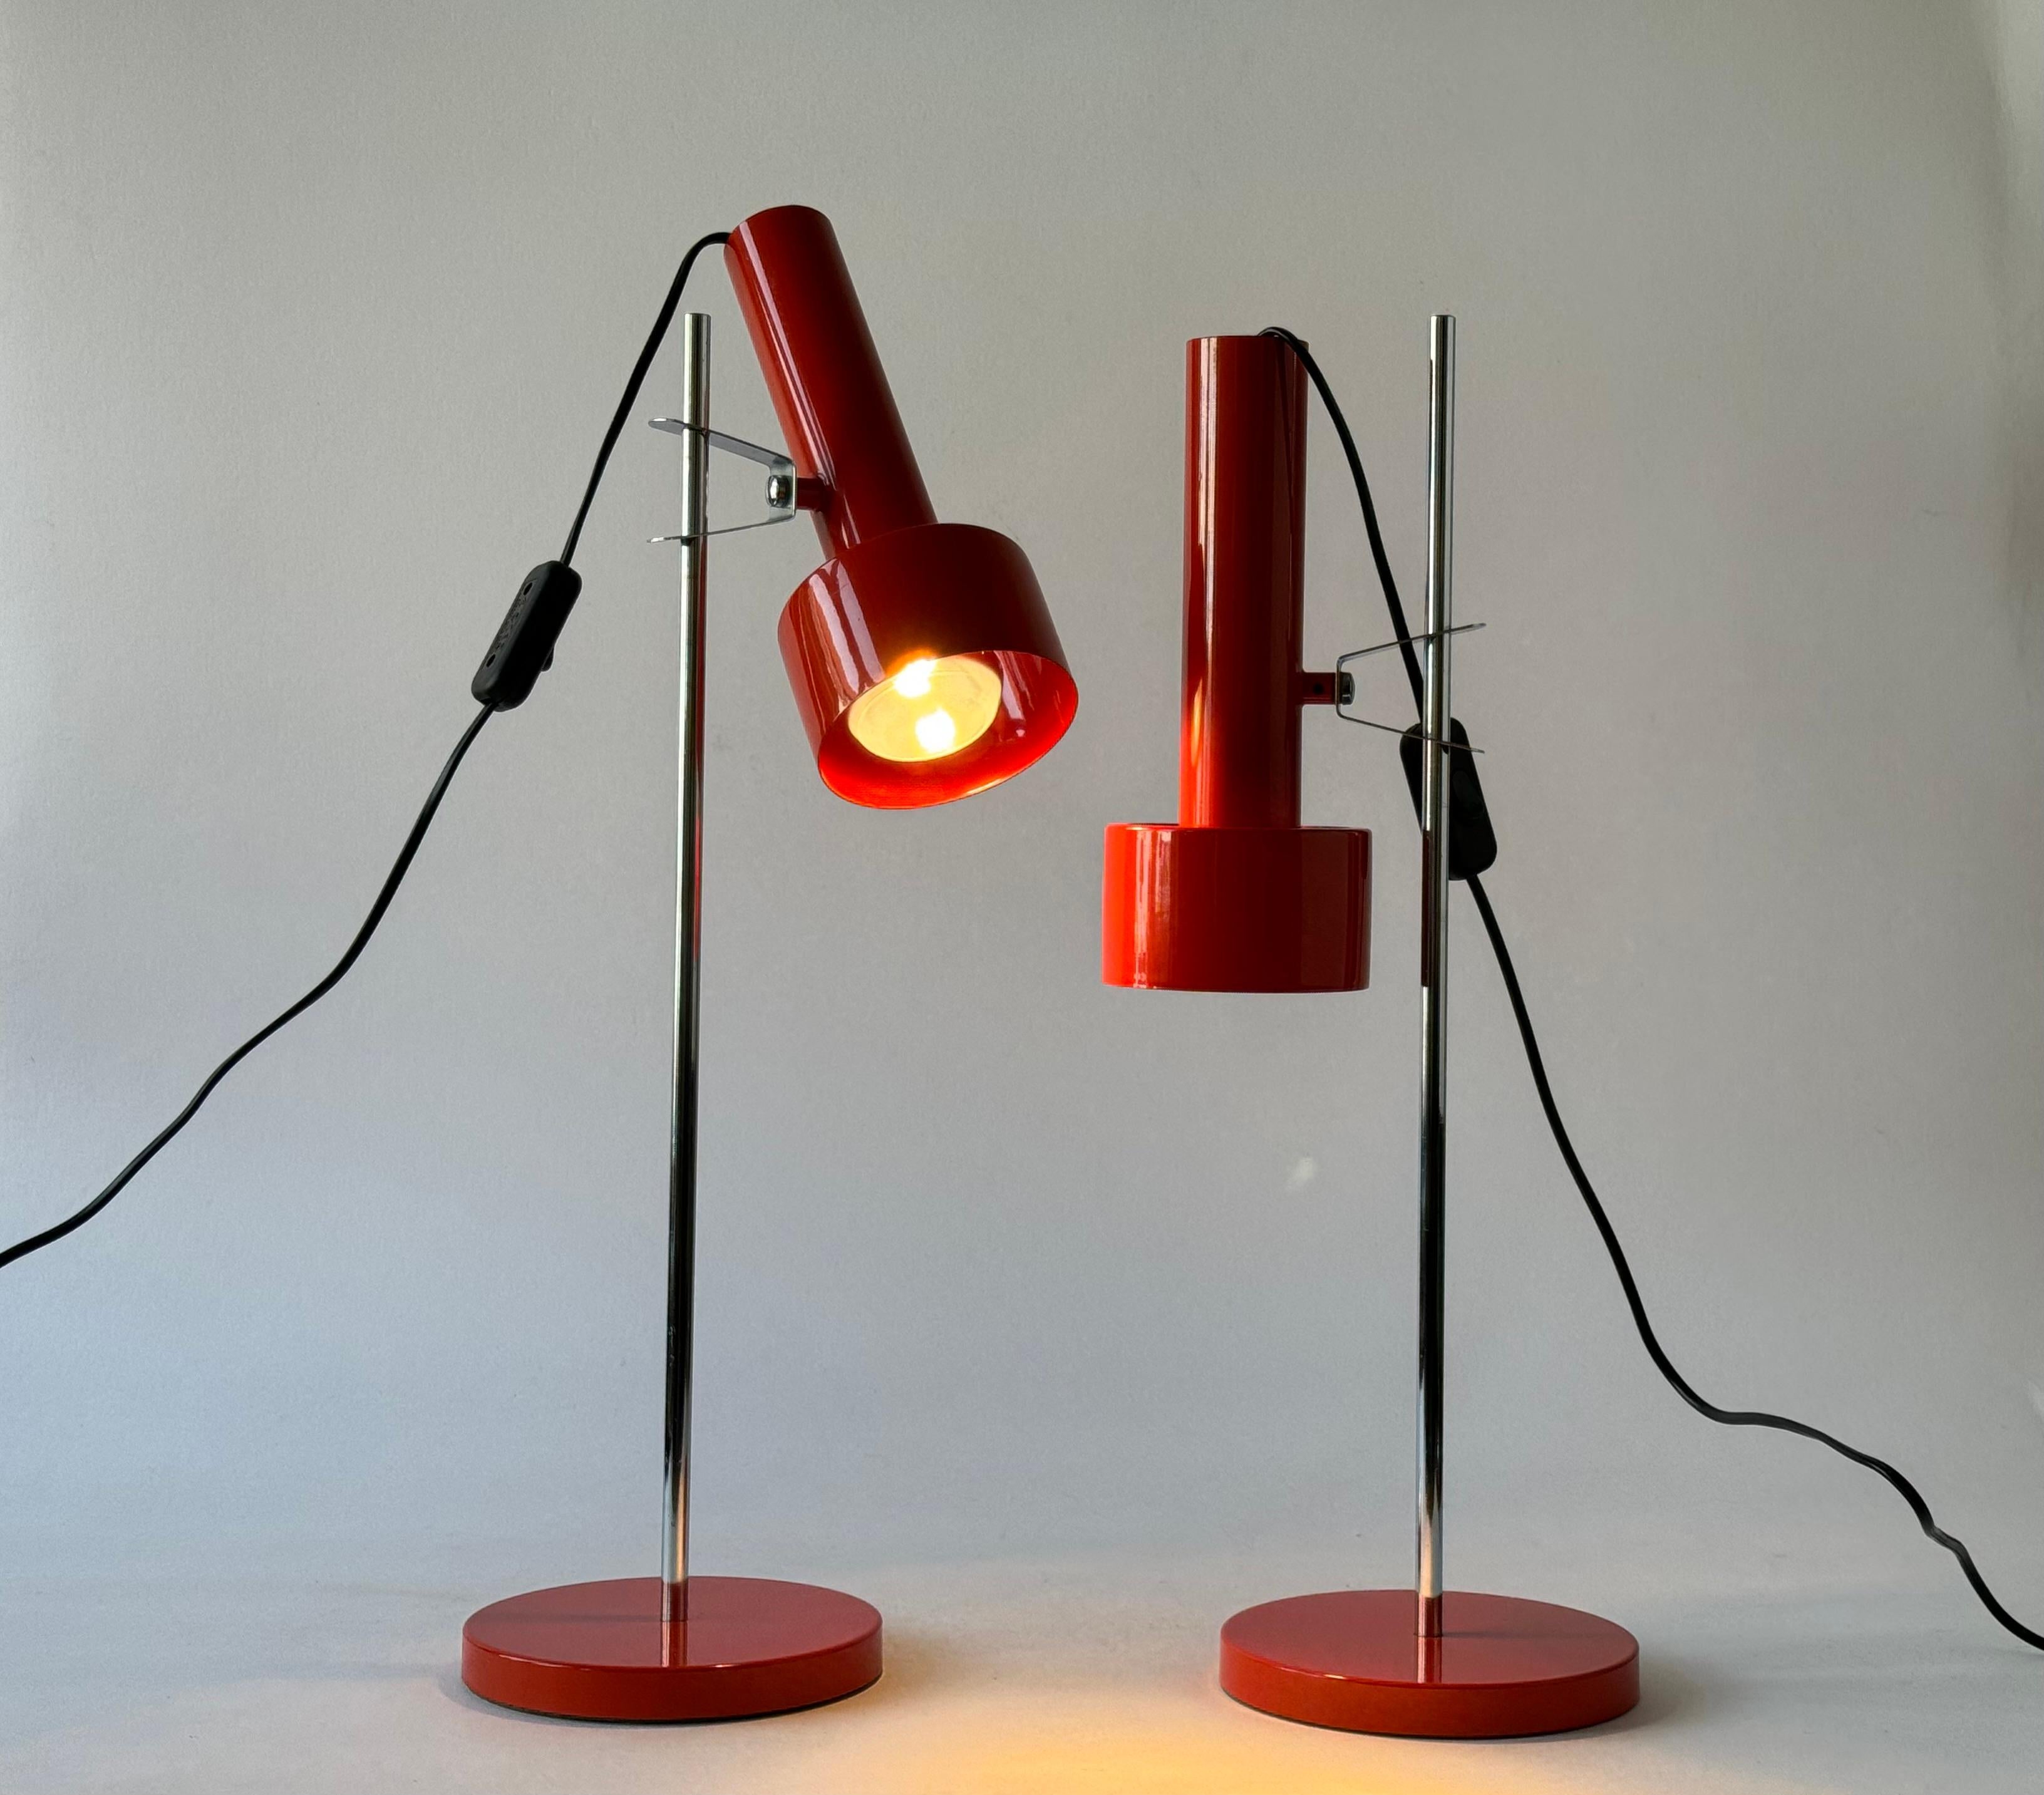 Pair of Mid-century Modern desk lamps made of metal. Made ca. 1970s.

The lamps come with the original orange lacquer. 
They are adjustable in all directions and can easily be slided up and down in height.

They have switchers on the wire.

Height